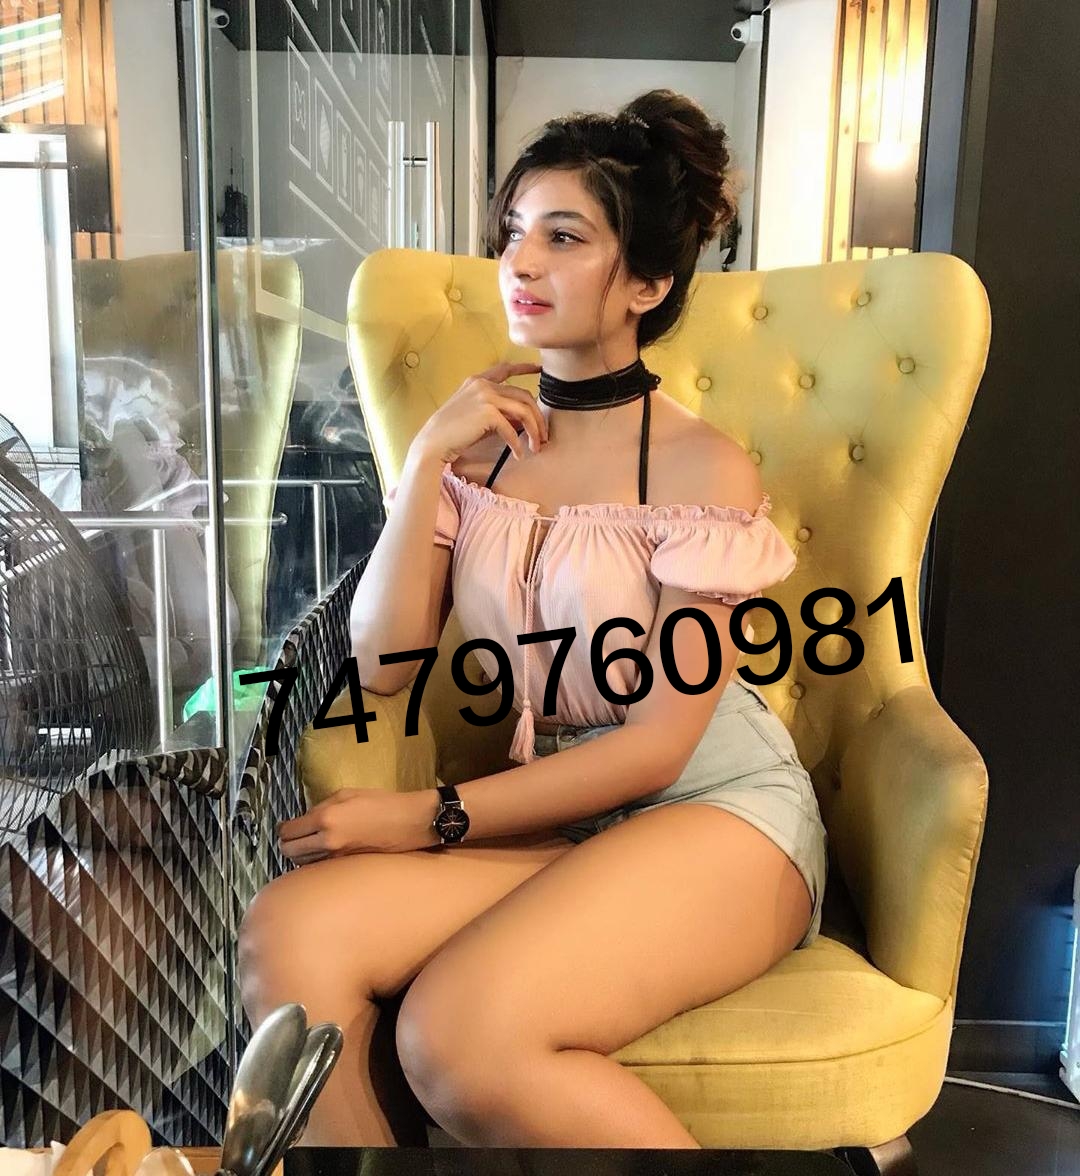 Nainital Low Price CASH PAYMENT Hot Sexy call College Girl Escort